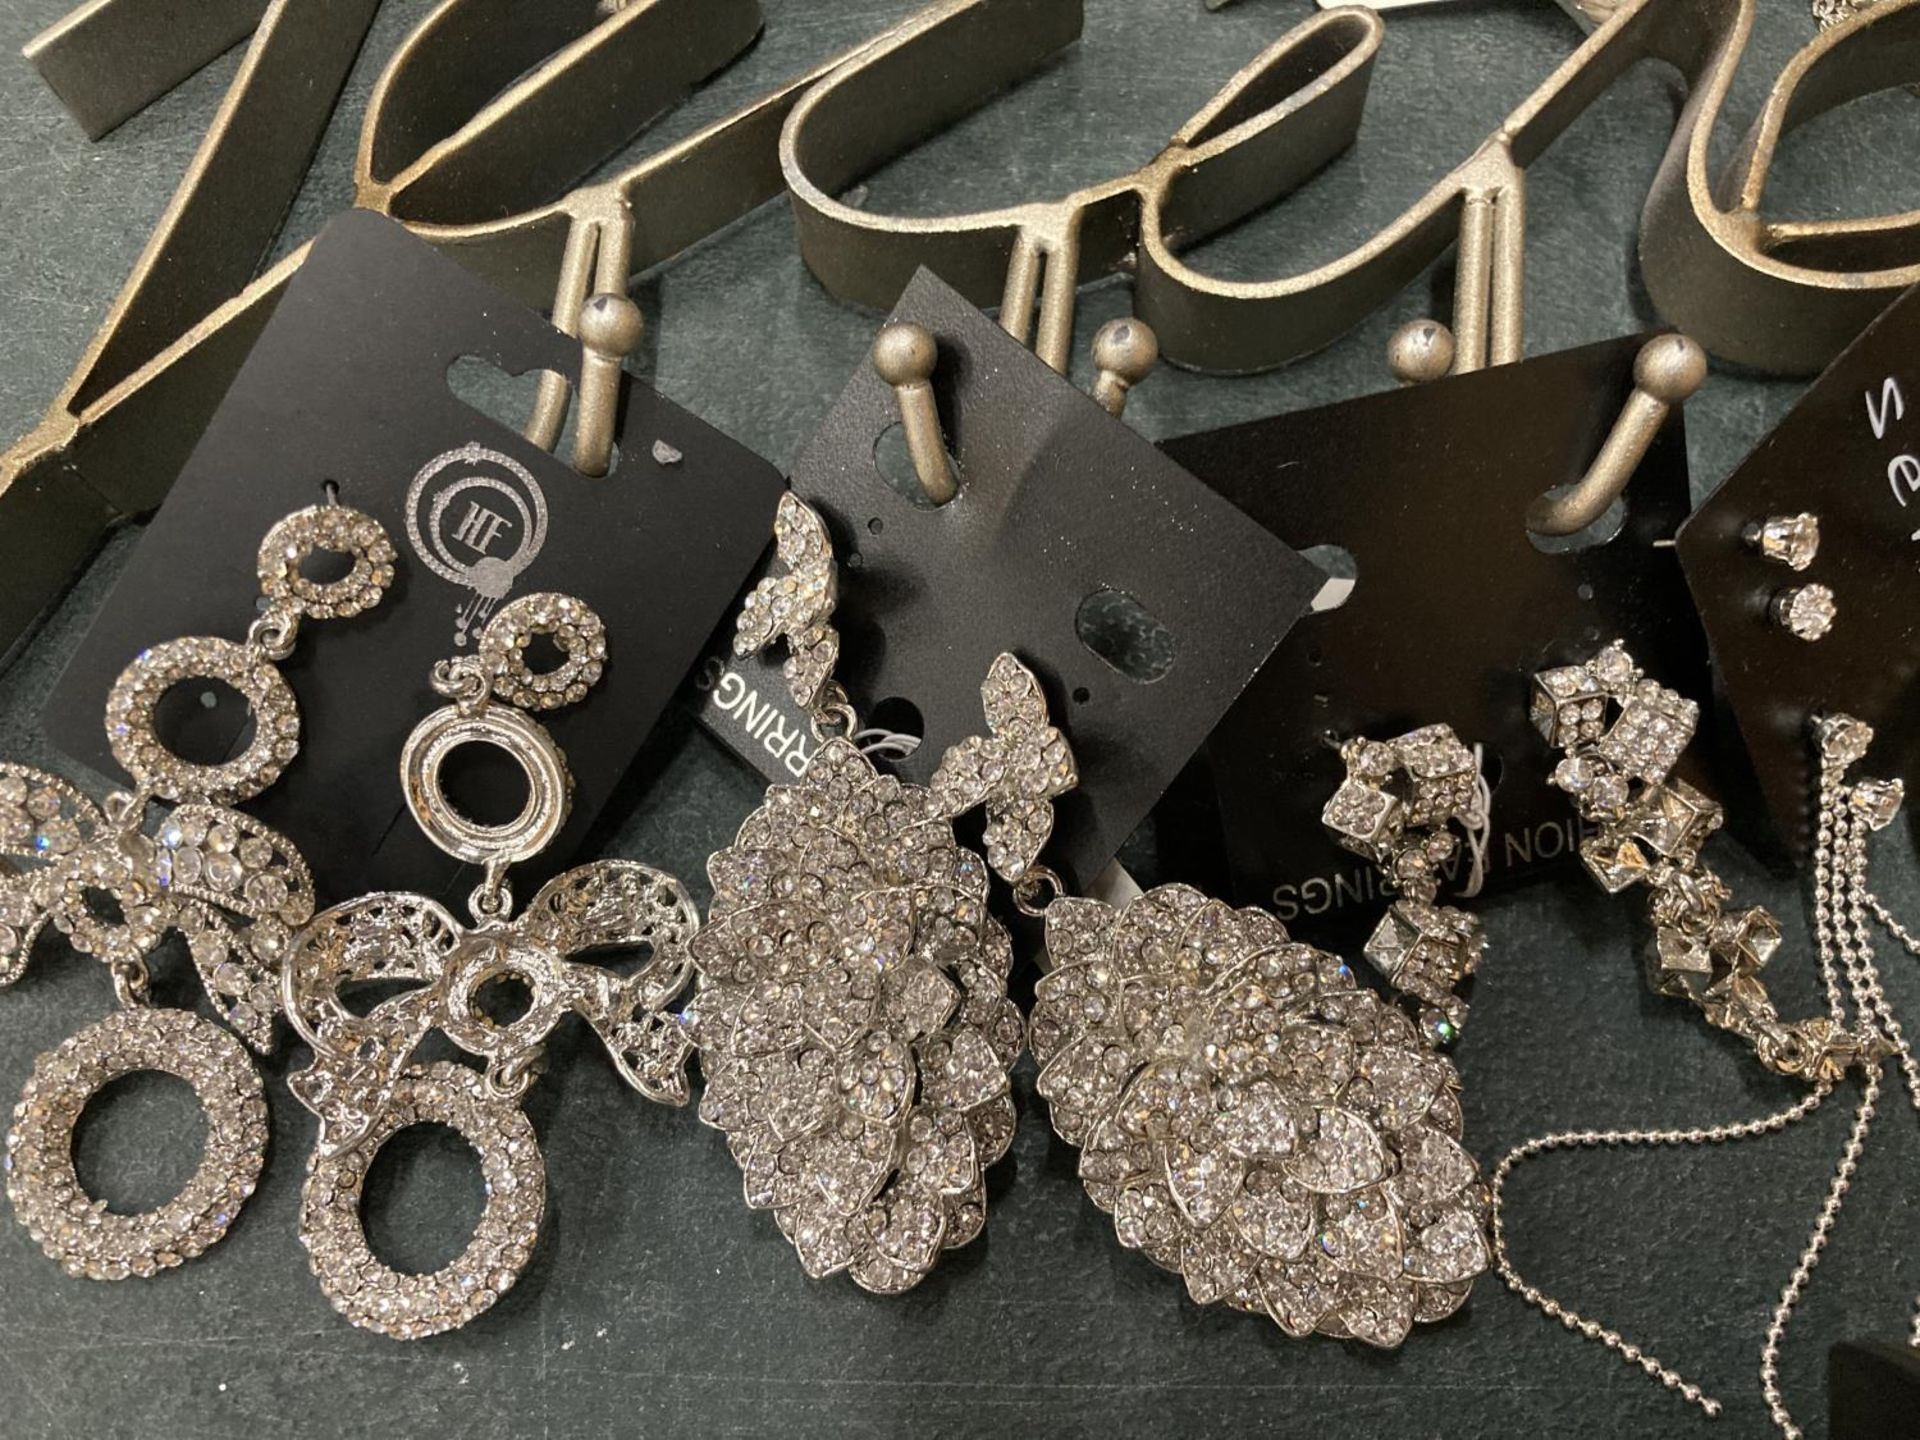 A QUANTITY OF COSTUME JEWELLERY TO INCLUDE RINGS, EARRINGS, BANGLES, NECKLACES, SOME BOXED - Image 10 of 10